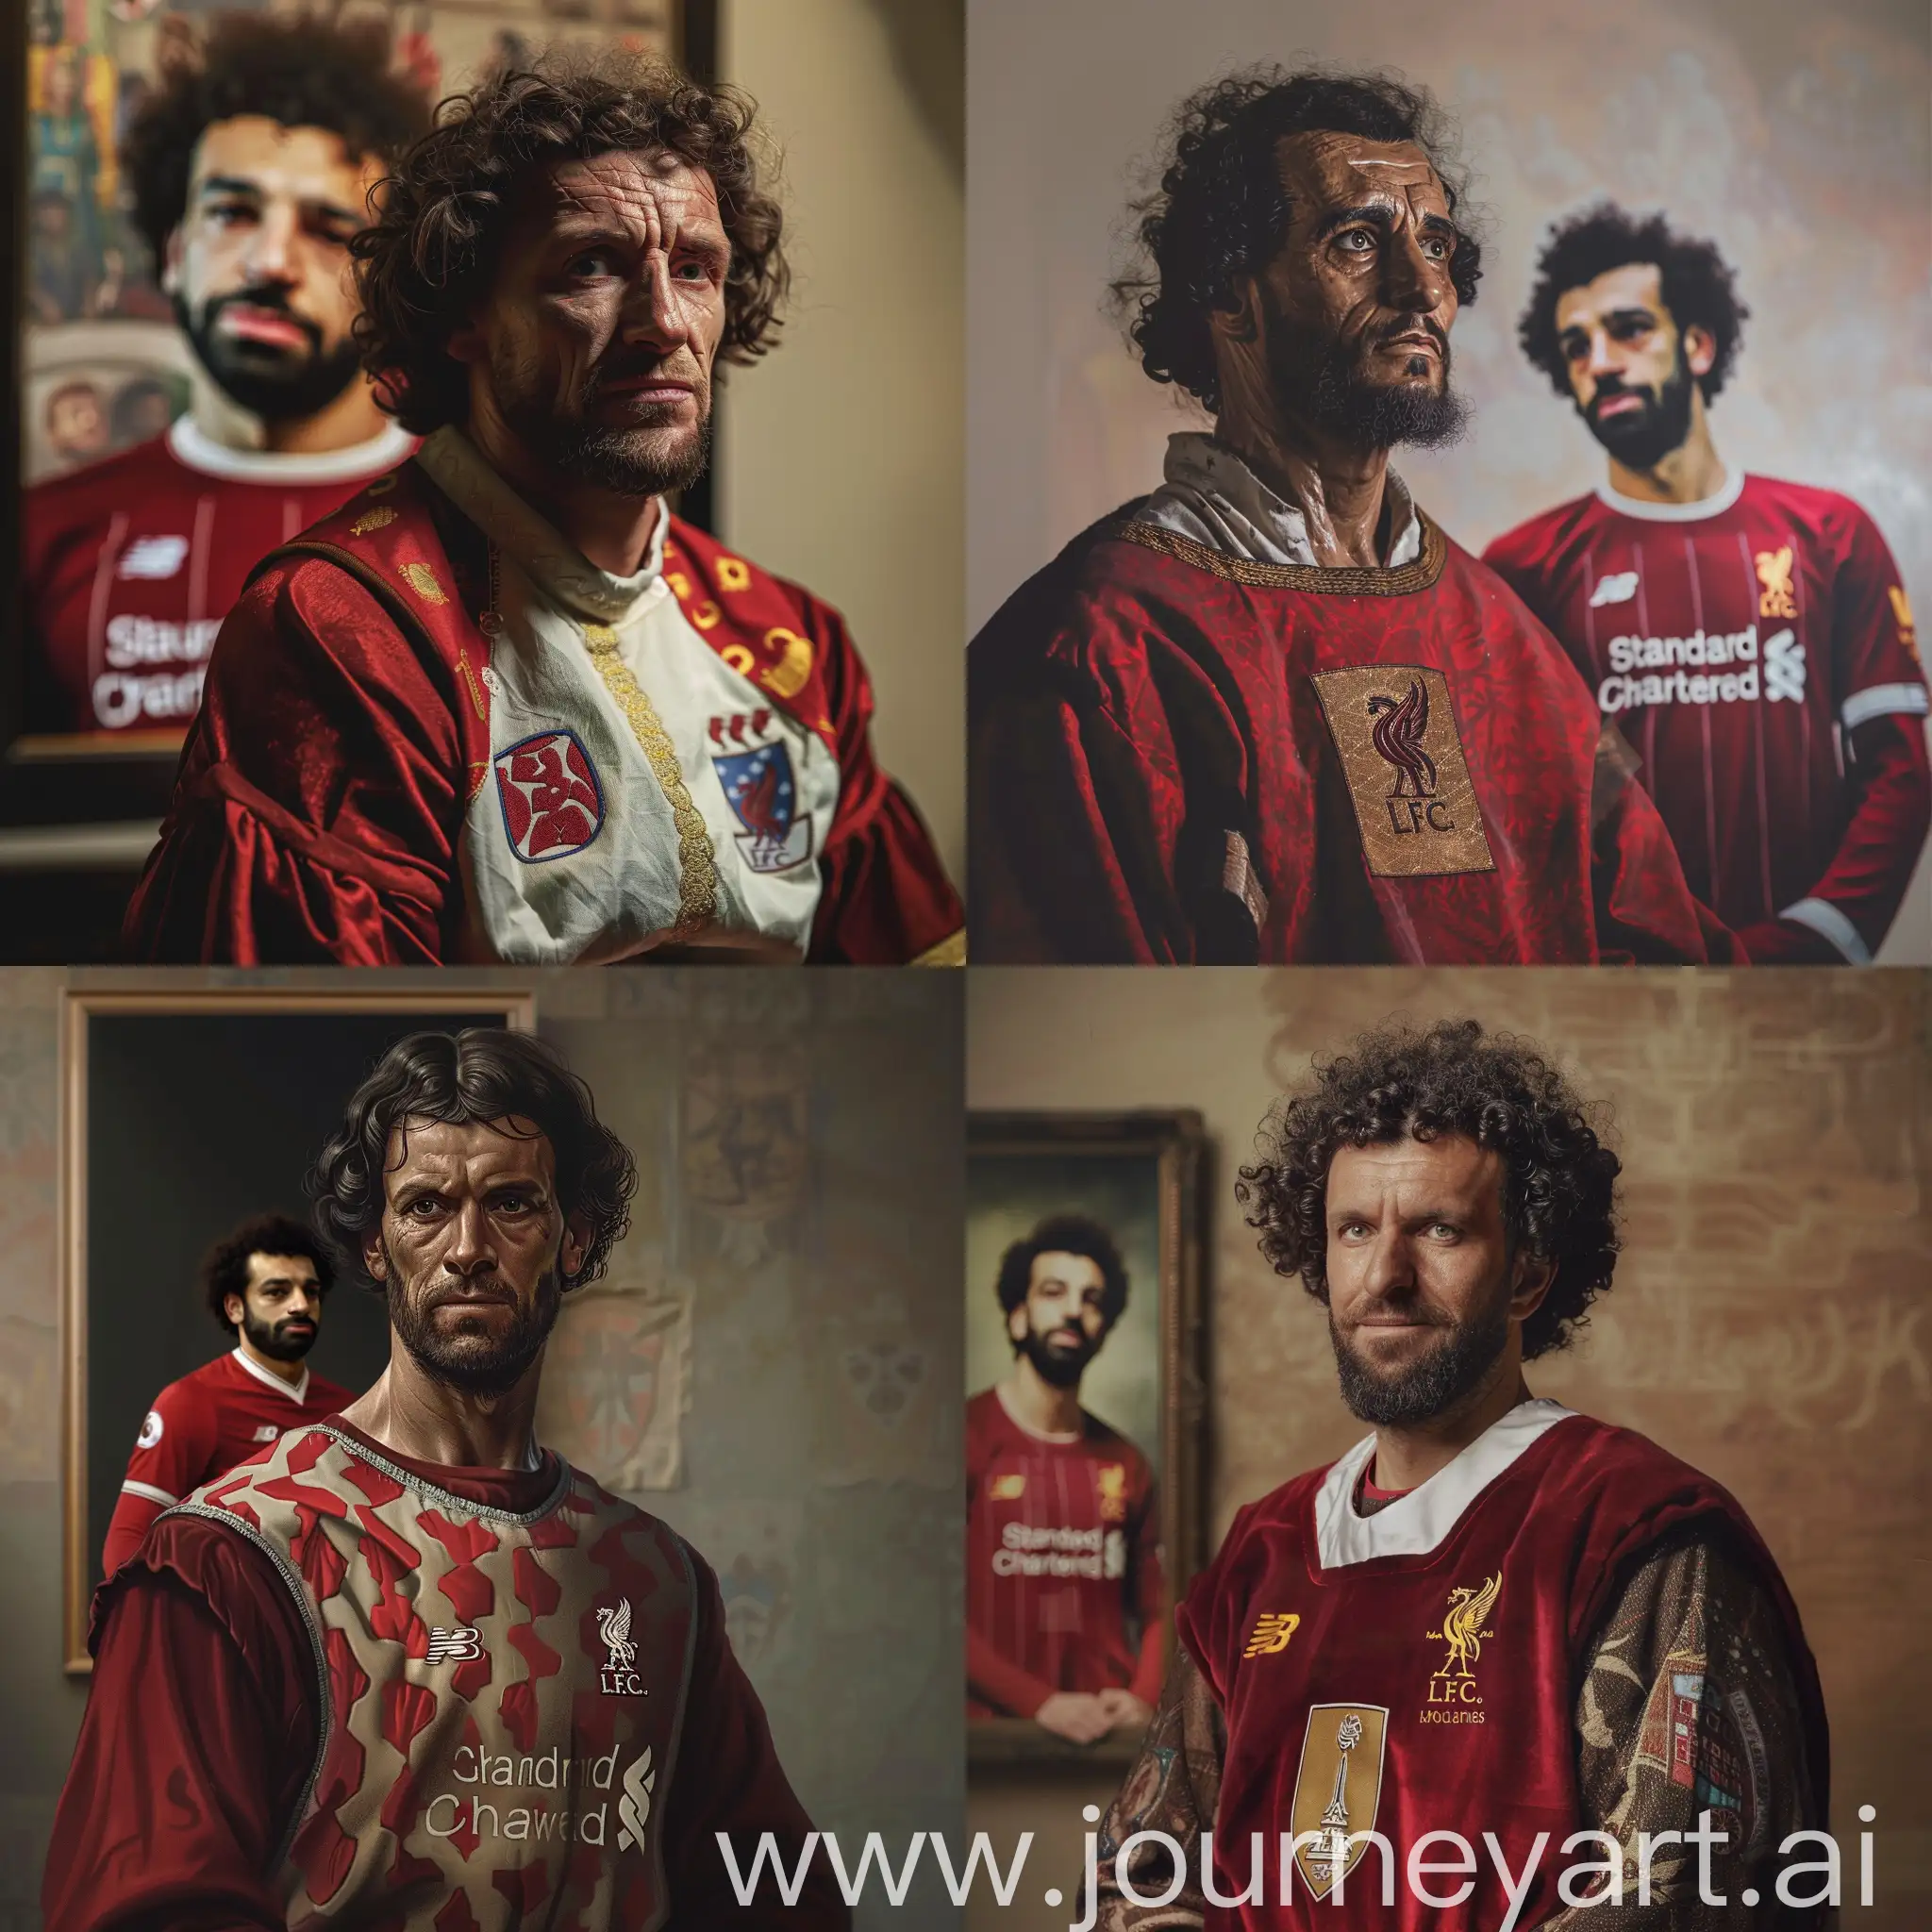 Anachronistic-Portrait-15th-Century-Englishman-in-Liverpool-FC-Jersey-with-Mohamed-Salah-in-Background